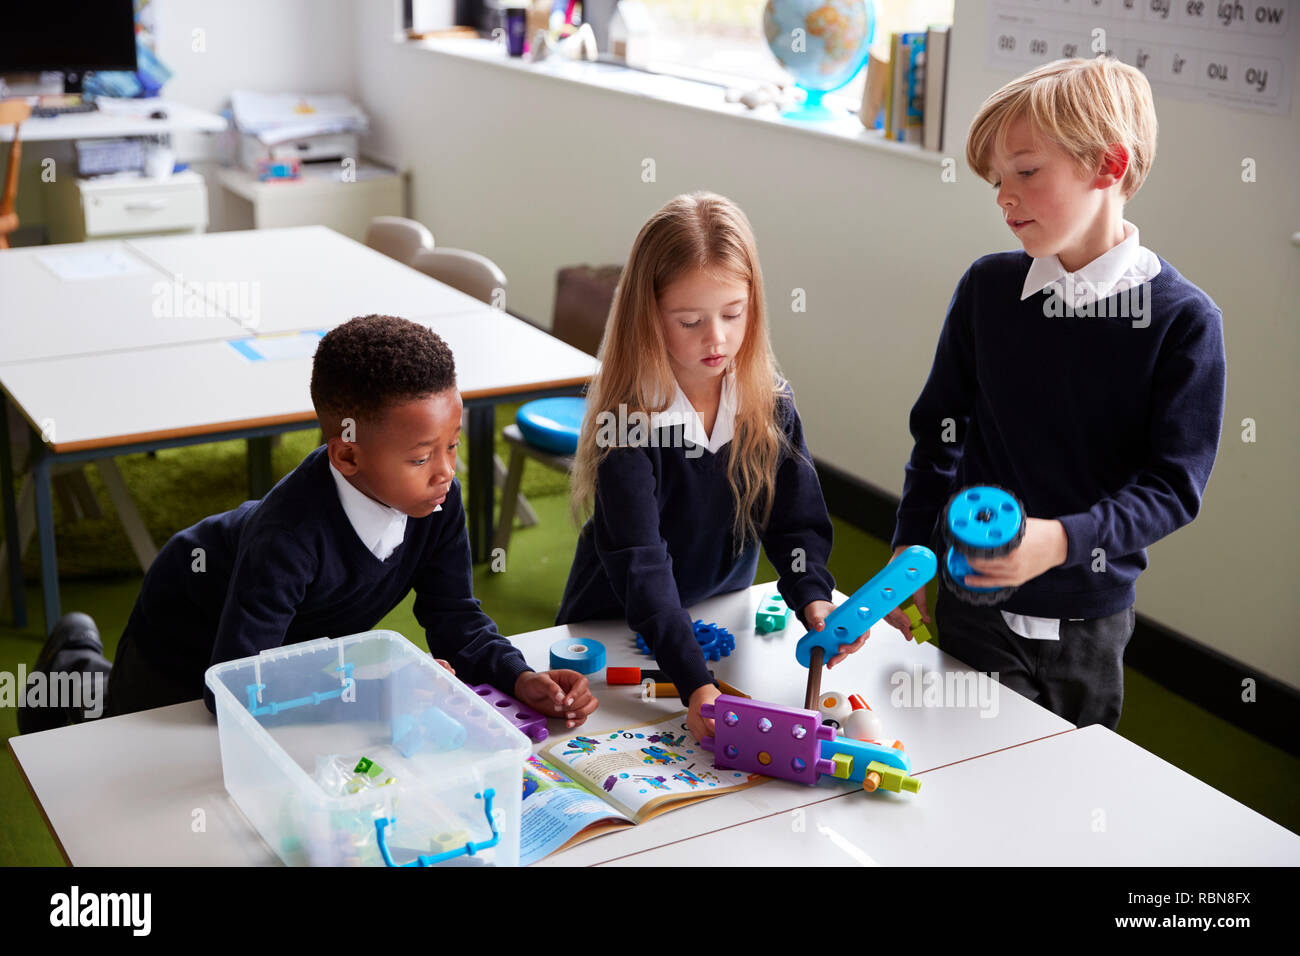 Elevated view of three primary school kids standing at a table in a classroom, working together with toy construction blocks Stock Photo